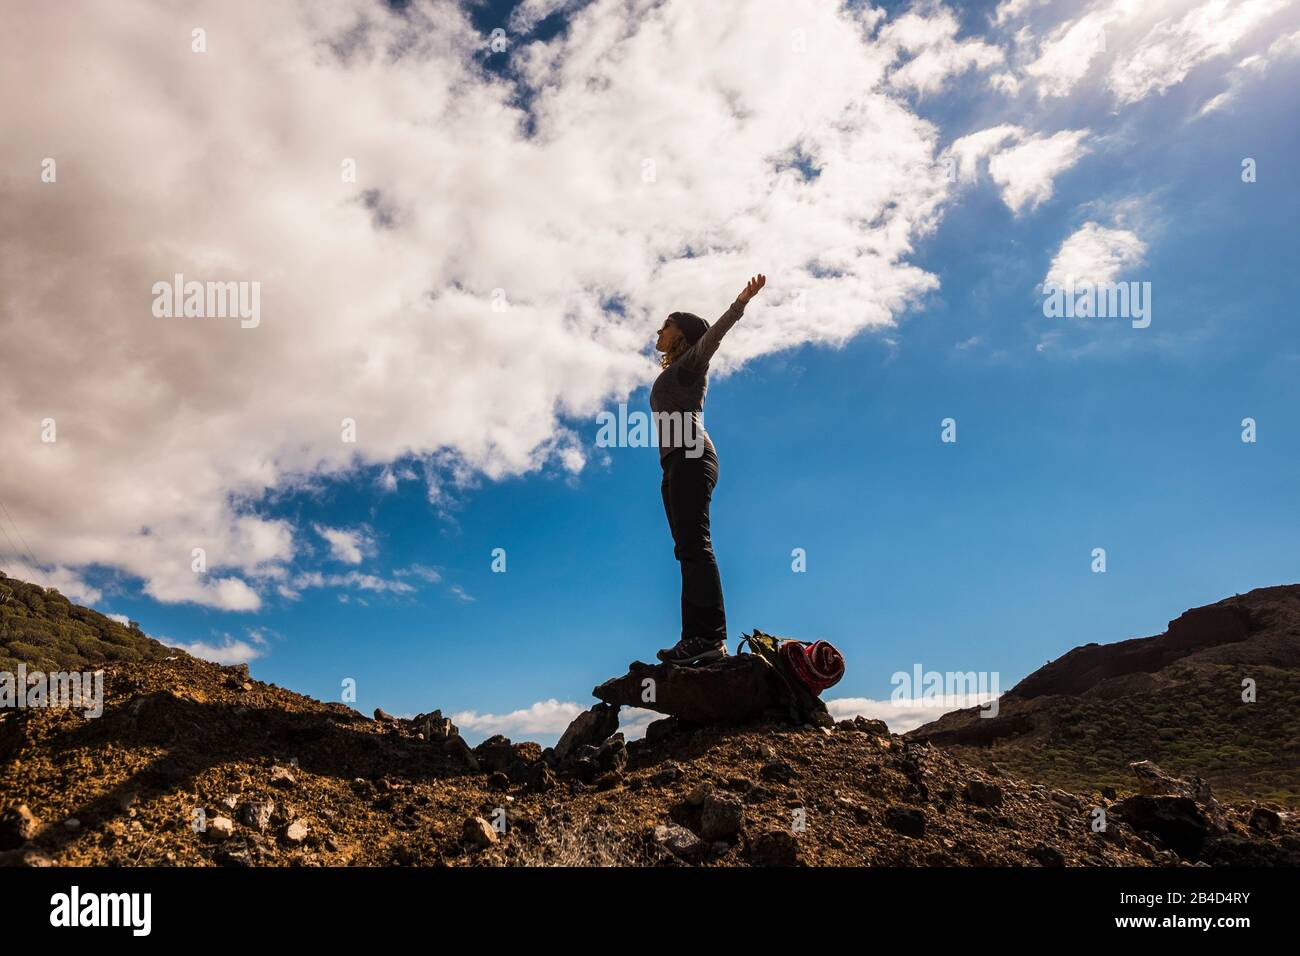 People having success in healthy outdoor leisure activity - trekking and adventure on mountains - standing woman with open arms enjoying freedom - blue sky in background Stock Photo